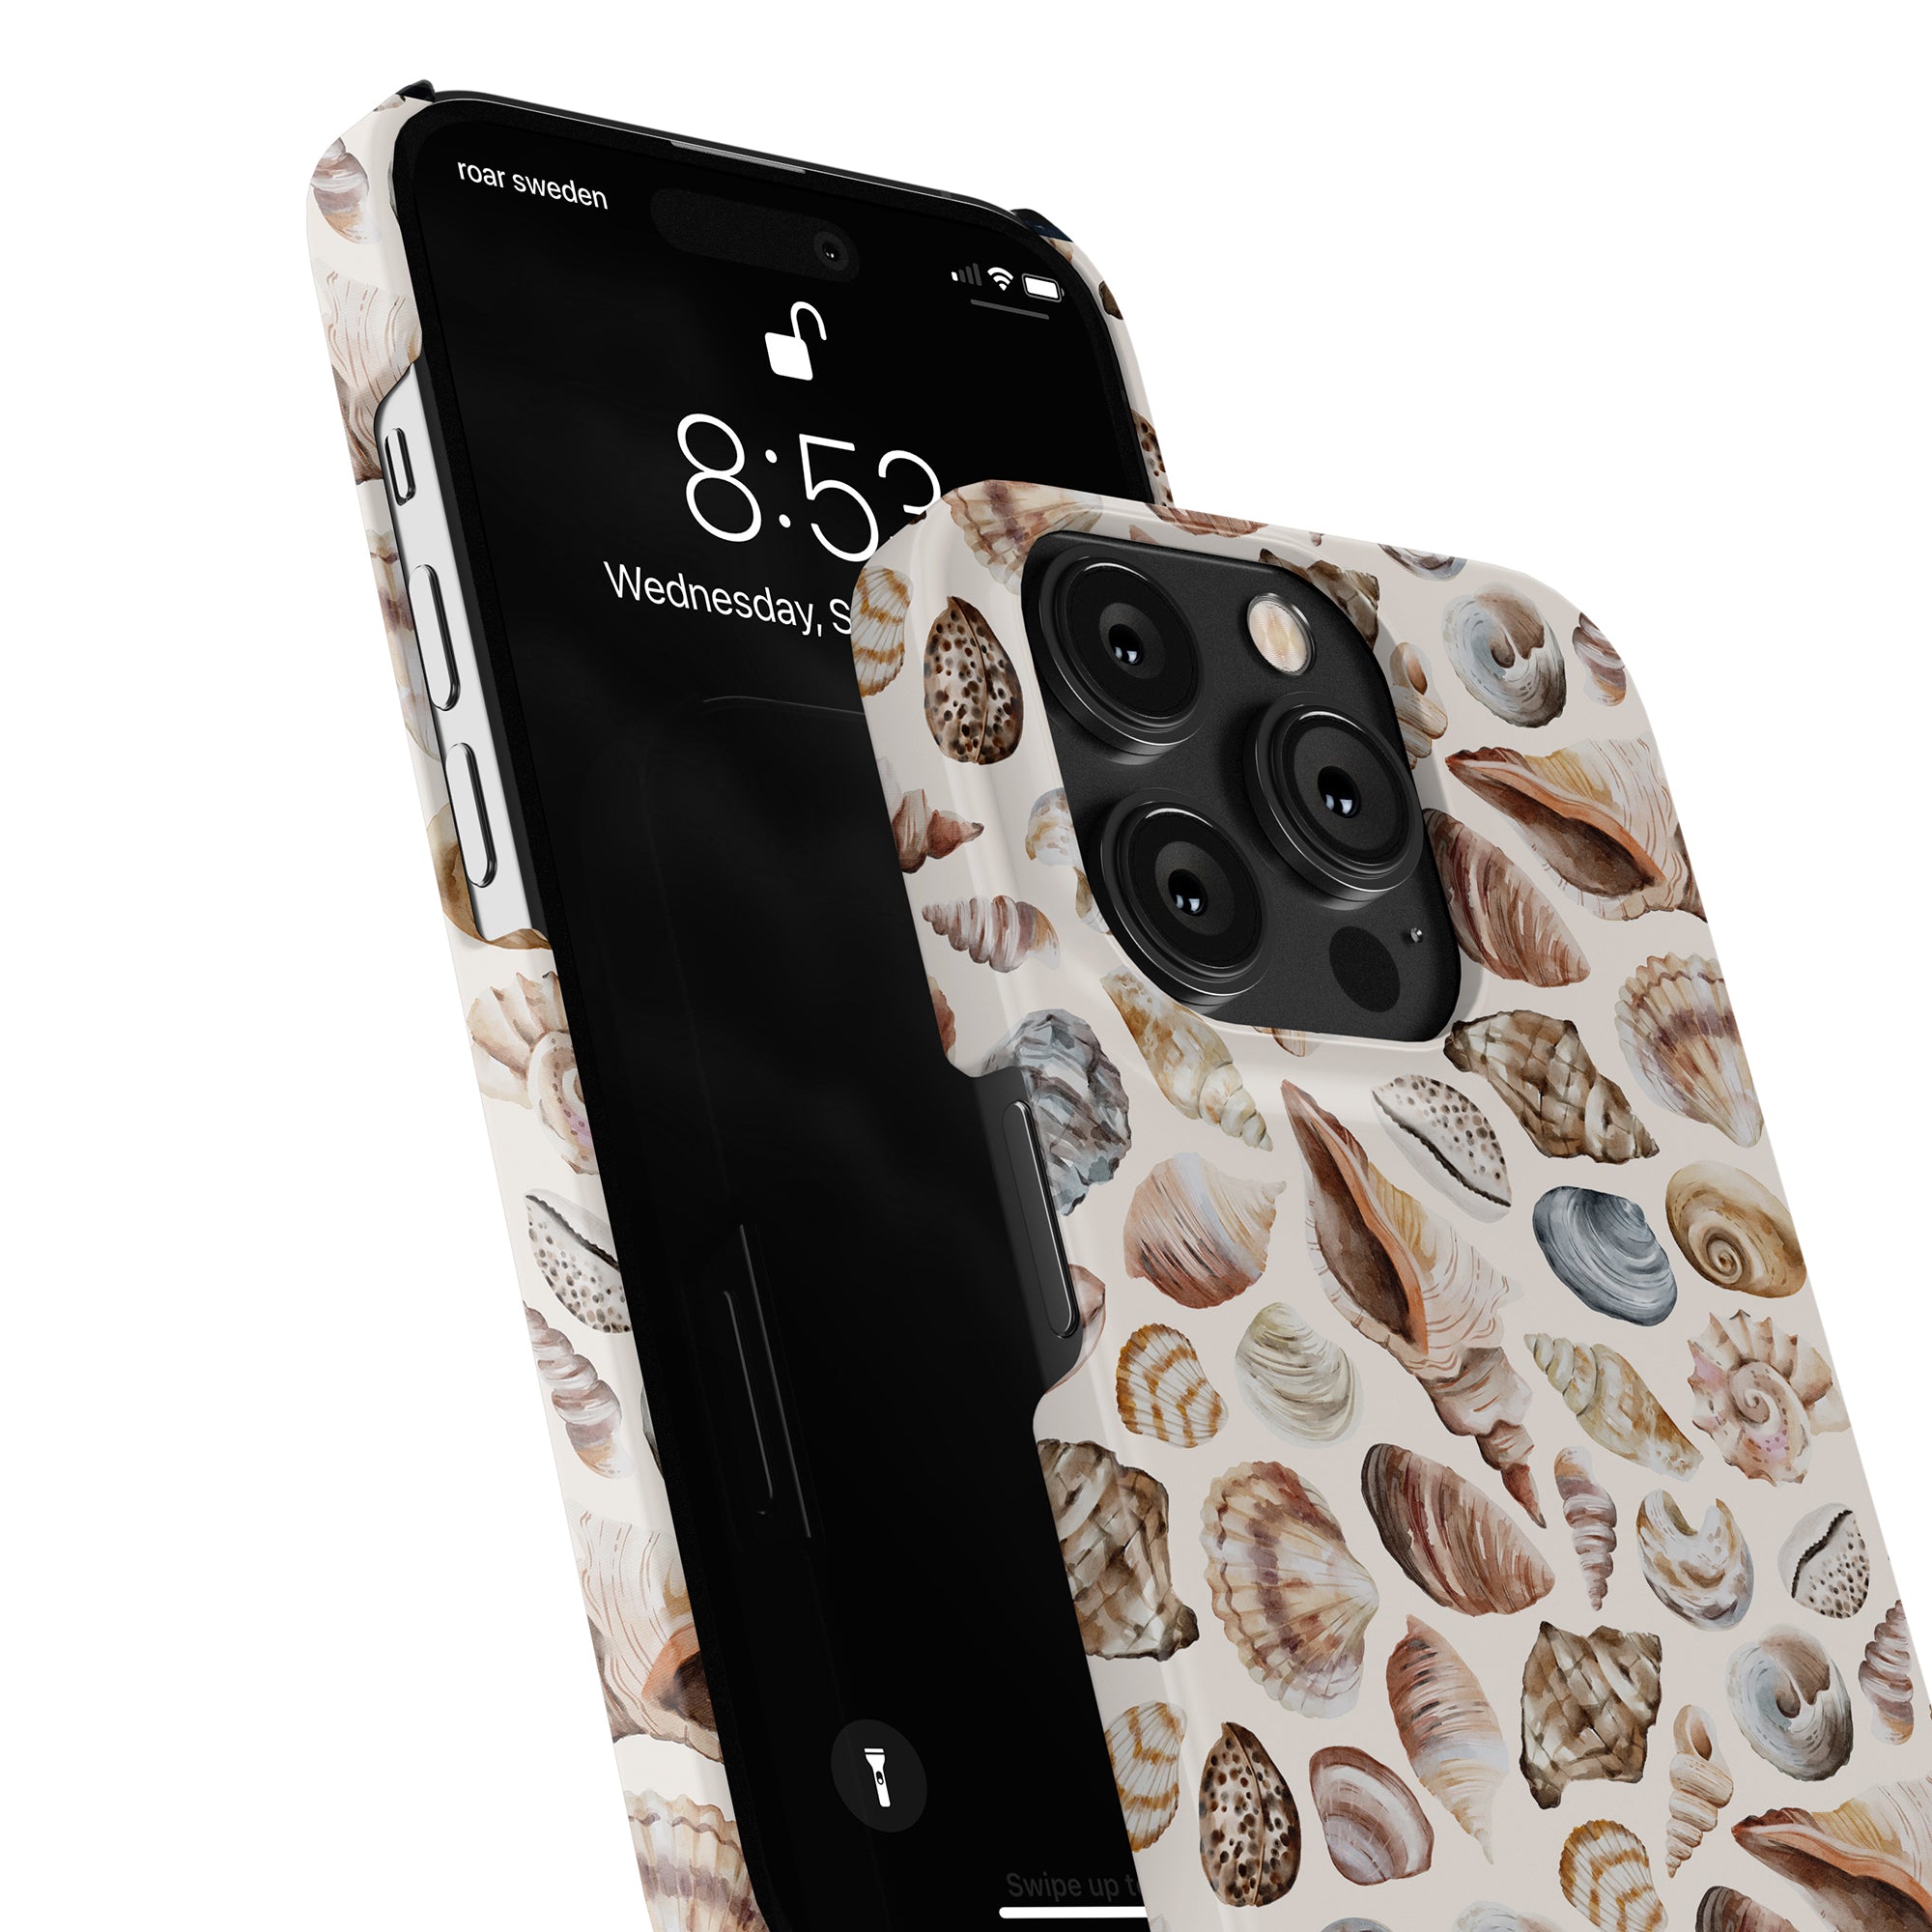 A Beach Shells - Slim case smartphone with a seashell-patterned case viewed from an angle, displaying the lock screen, optimized for SEO.